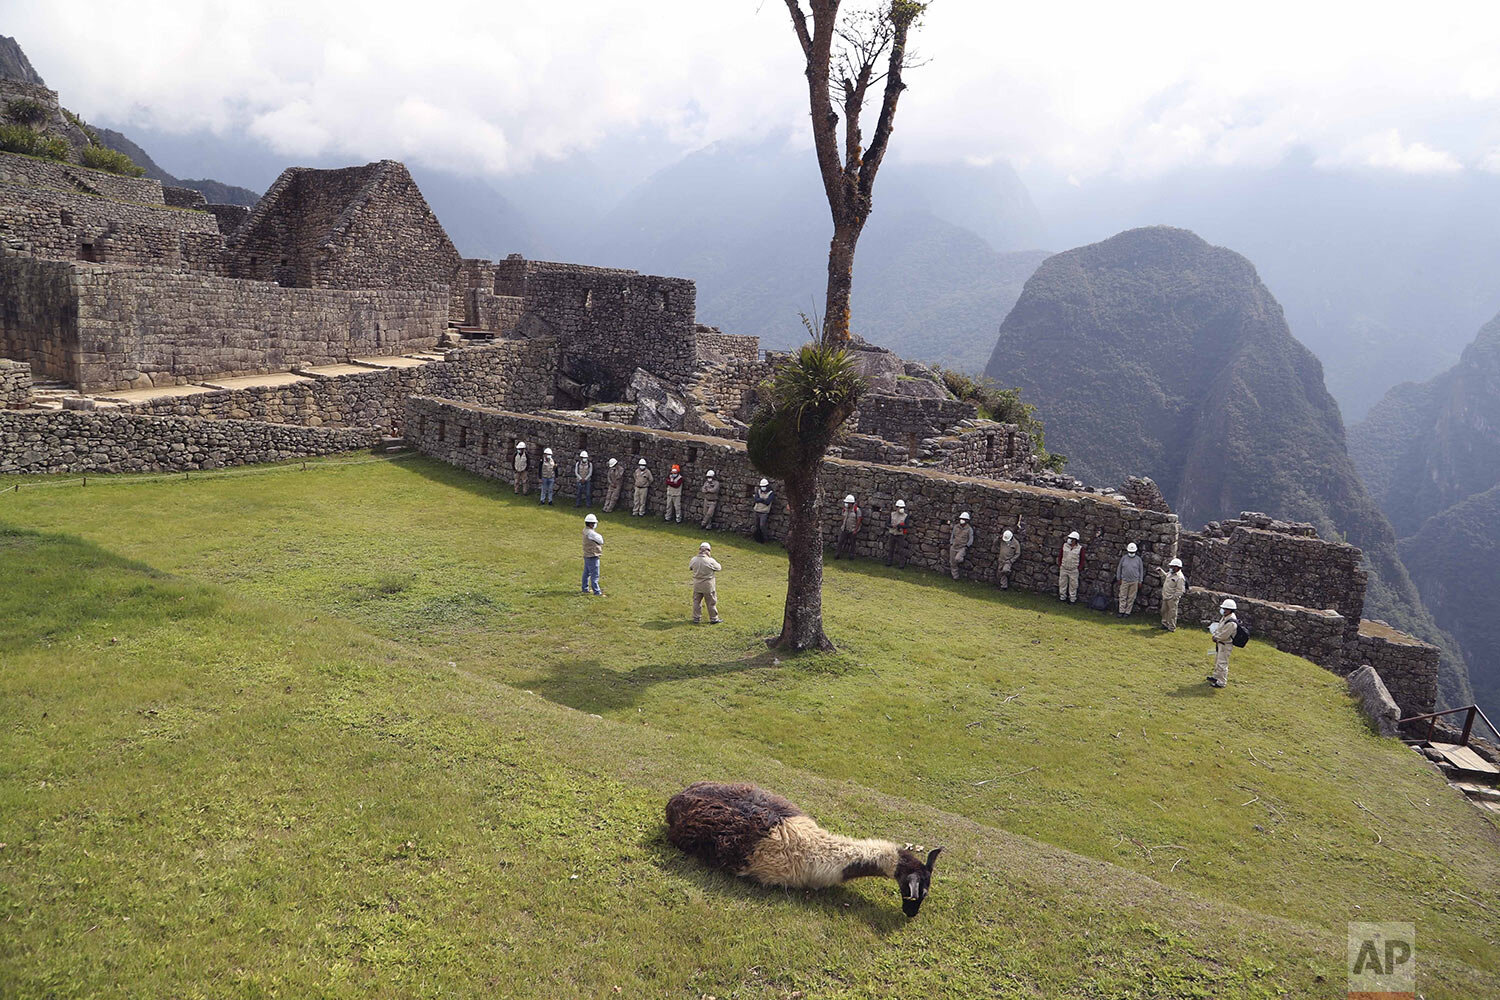  A lama lays on the grass at the Machu Picchu archeological site, where only maintenance workers gather while it's closed to the public amid the COVID-19 pandemic, in the department of Cusco, Peru, Oct. 27, 2020. (AP Photo/Martin Mejia) 